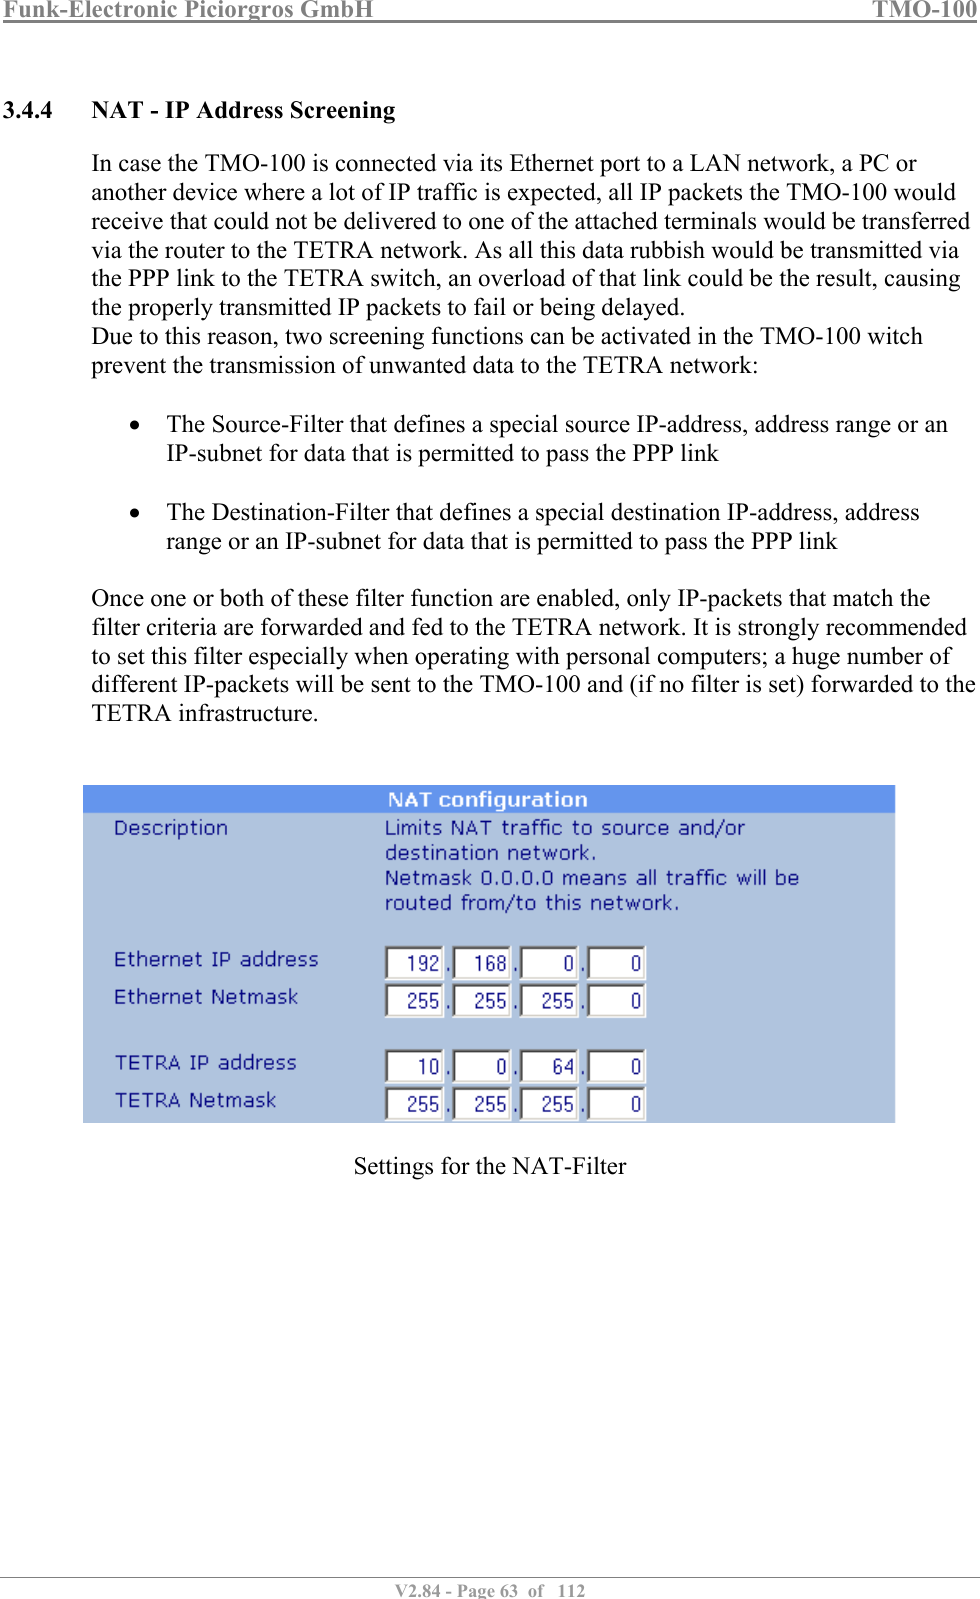 Funk-Electronic Piciorgros GmbH   TMO-100   V2.84 - Page 63  of   112   3.4.4 NAT - IP Address Screening In case the TMO-100 is connected via its Ethernet port to a LAN network, a PC or another device where a lot of IP traffic is expected, all IP packets the TMO-100 would receive that could not be delivered to one of the attached terminals would be transferred via the router to the TETRA network. As all this data rubbish would be transmitted via the PPP link to the TETRA switch, an overload of that link could be the result, causing the properly transmitted IP packets to fail or being delayed. Due to this reason, two screening functions can be activated in the TMO-100 witch prevent the transmission of unwanted data to the TETRA network:   The Source-Filter that defines a special source IP-address, address range or an IP-subnet for data that is permitted to pass the PPP link   The Destination-Filter that defines a special destination IP-address, address range or an IP-subnet for data that is permitted to pass the PPP link  Once one or both of these filter function are enabled, only IP-packets that match the filter criteria are forwarded and fed to the TETRA network. It is strongly recommended to set this filter especially when operating with personal computers; a huge number of different IP-packets will be sent to the TMO-100 and (if no filter is set) forwarded to the TETRA infrastructure.      Settings for the NAT-Filter   